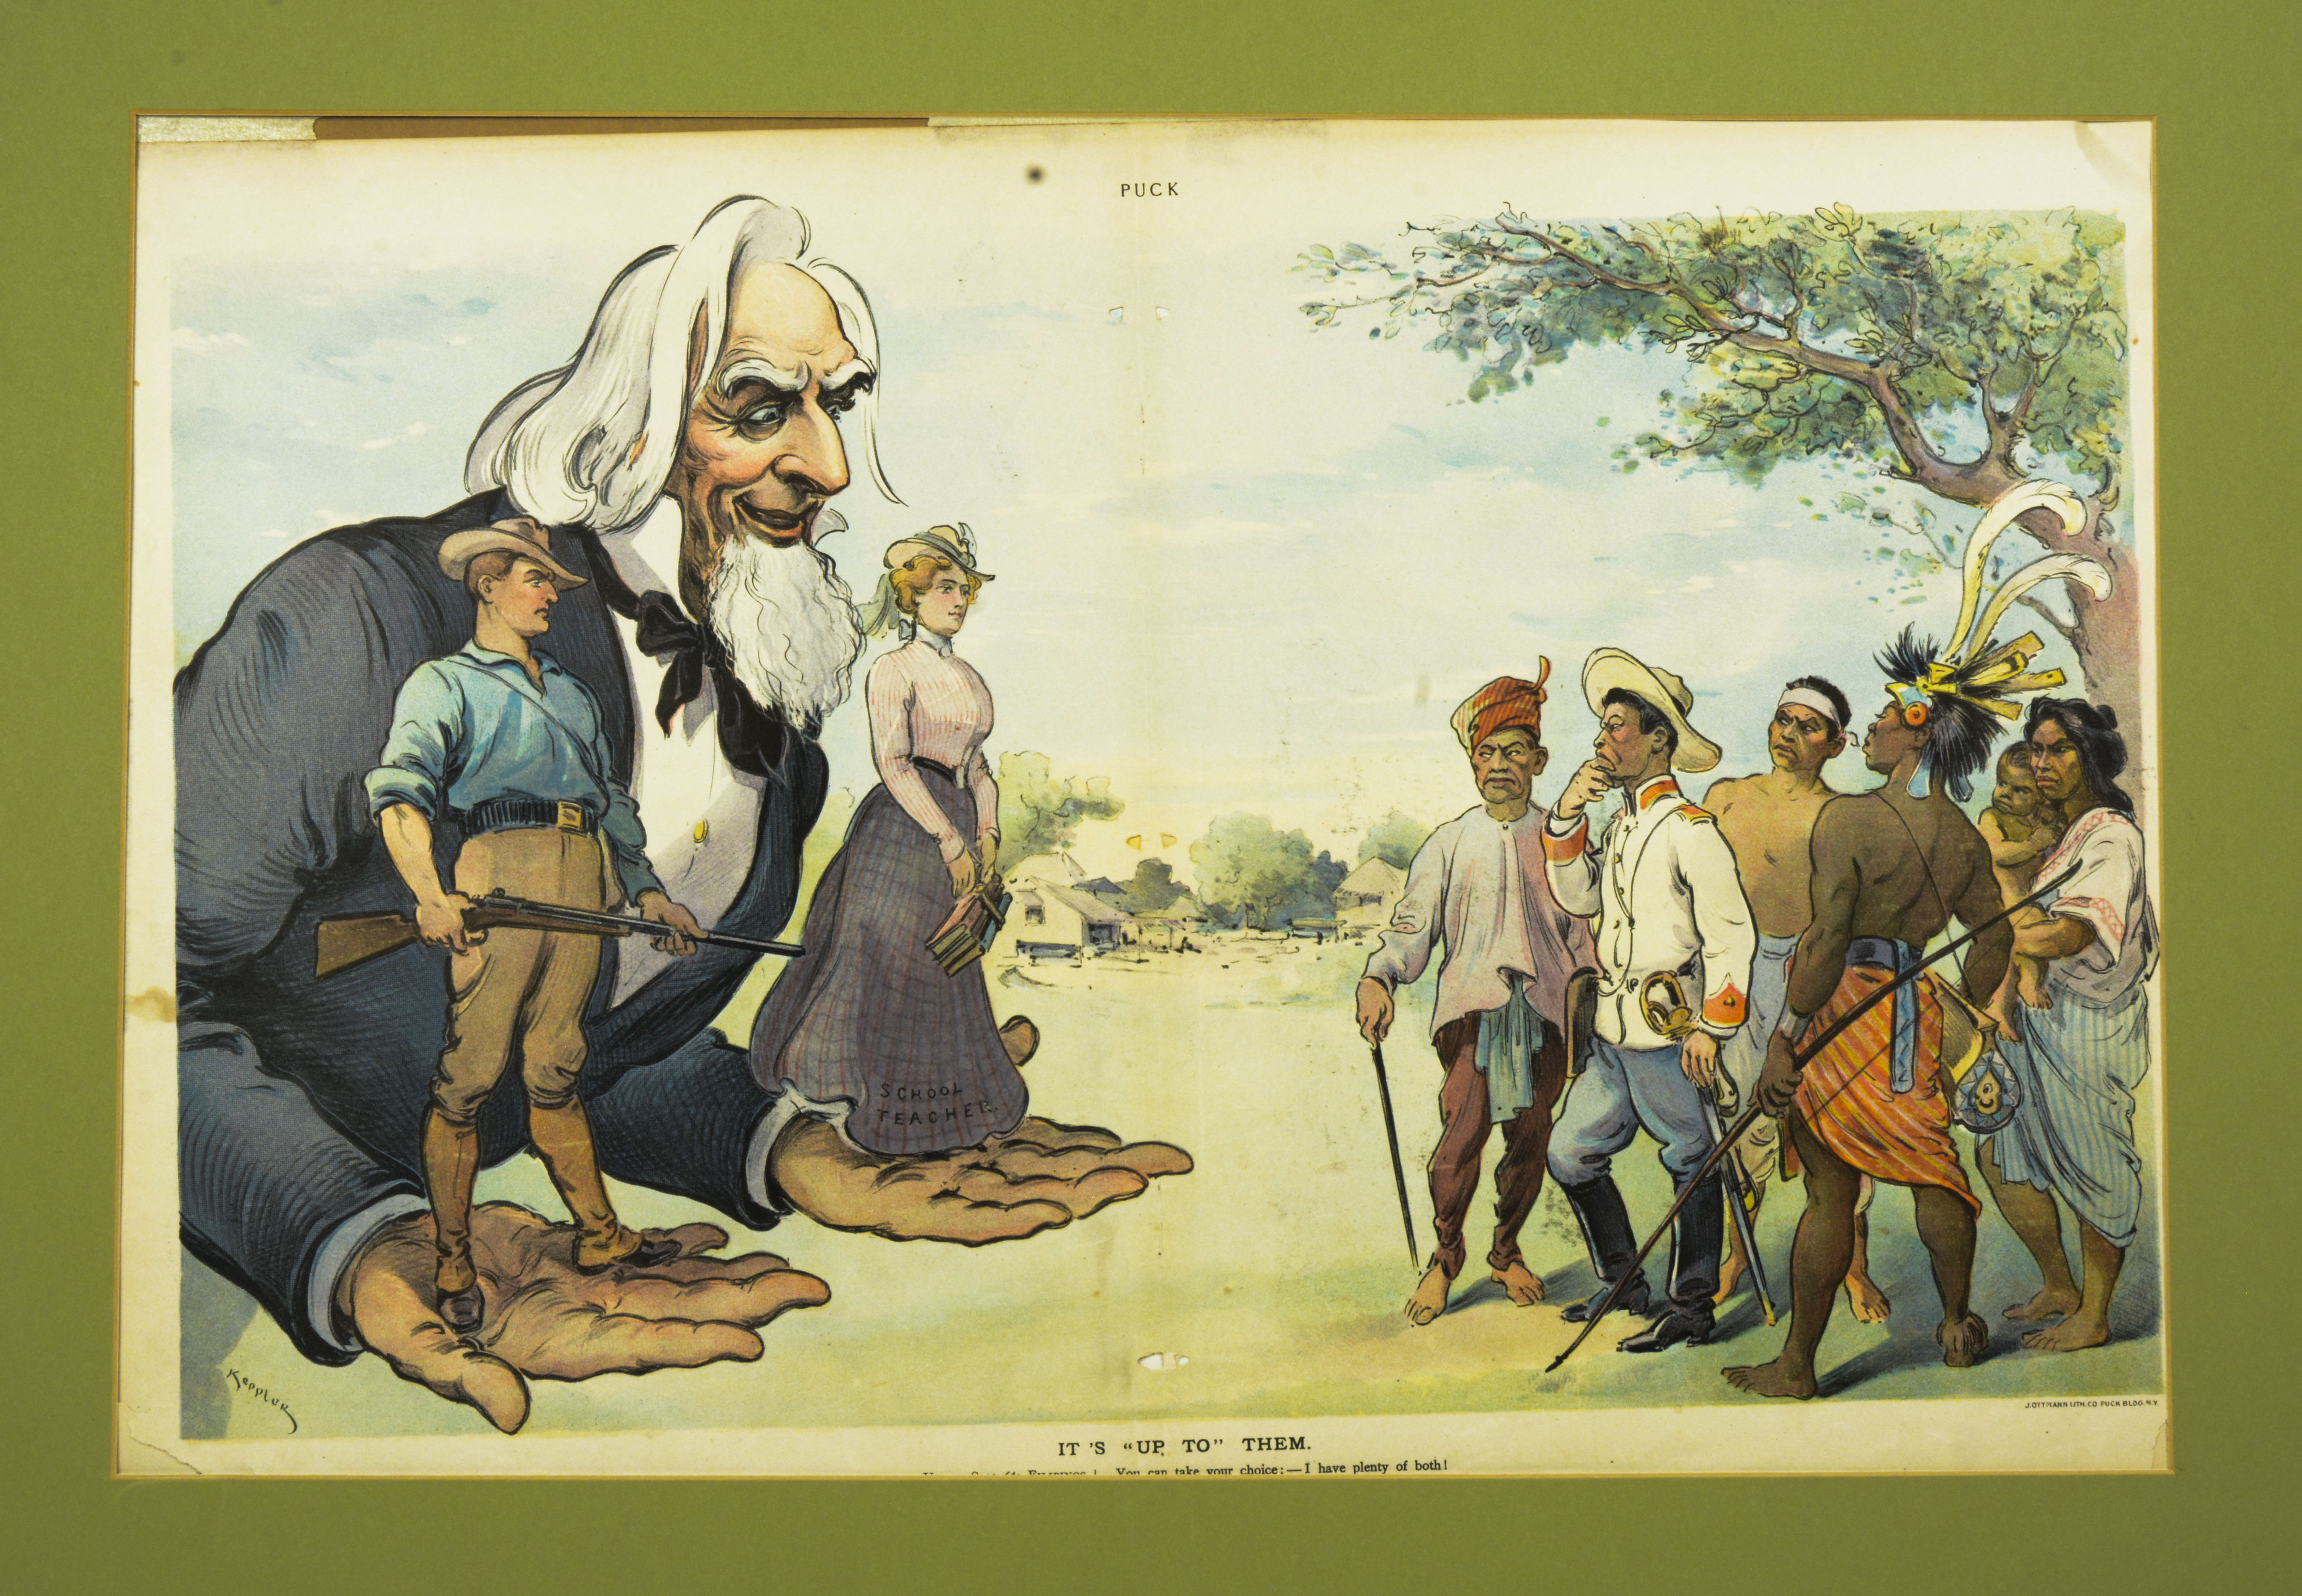 Illustration owned by Paulla SantosAcquired in June 2017 from Odana Antiques and Fine Arts, Madison, WIBought while antiquing.Illustration of Uncle Sam, white female teacher, white male soldier, Filipinos.Language in EnglishNotes from Sarah Carlson, in discussion with Santos: Found in same antique store [as previous], different seller. Pulls Keppler print from New York, around 1898. Uncle Sam holding 2 options, offering teaches (civilizing, learning westerners) or man with a gun. Filipinos onother with reacting, representing different regions: Mindanao, Manila/Tagalog, lowlands, Cordilleras, Northerners. Walking through friend saw it, pointed it out, got excited, drew me. I study US/Philippine relations. Thought it was too expensive, negotiated through text topurchase for $150. Connections at UW-Madison helped make that connection. Kept wrapped in a closet away from my cat-hoping to frame it. Hung in apartment away from light. Studying transnational marriage between Philippines and US. Parents had a transnational arrangedmarriage by maternal group. Grandmother (Ran away at 16 to get married against parents wishes. Never legally married but had 8 children. Eventually grandmother left went to Singapore, worked in hotel, met new husband.) had 4 sons, 4 daughters, 2 daughters married US men, 3rddaughter married an American too but wasn’t arranged. Only learned parents marriage was arranged until recently. Wanted to know more about imperialism, US/Philippines relationship, penpals/”mail order”, US servicemen/entertainment workers, bride schools. How the USsponsored bride schools in the USA haven’t found much written about it. Learning Tagalog - mom’s first language. Last name is Santos, but pronounced English Way, dad is American. Grandfather’s(adoptive parents are Filipino, 1930’s huge anti-Filipino sentiment, howdid they adopt a white boy? Family lore of kidnapping. Any views, findings, conclusions, or recommendations expressed in this story do not necessarily represent those of the National Endowment for the Humanities. (c) Field Museum of Natural History - CC BY-NC 4.0